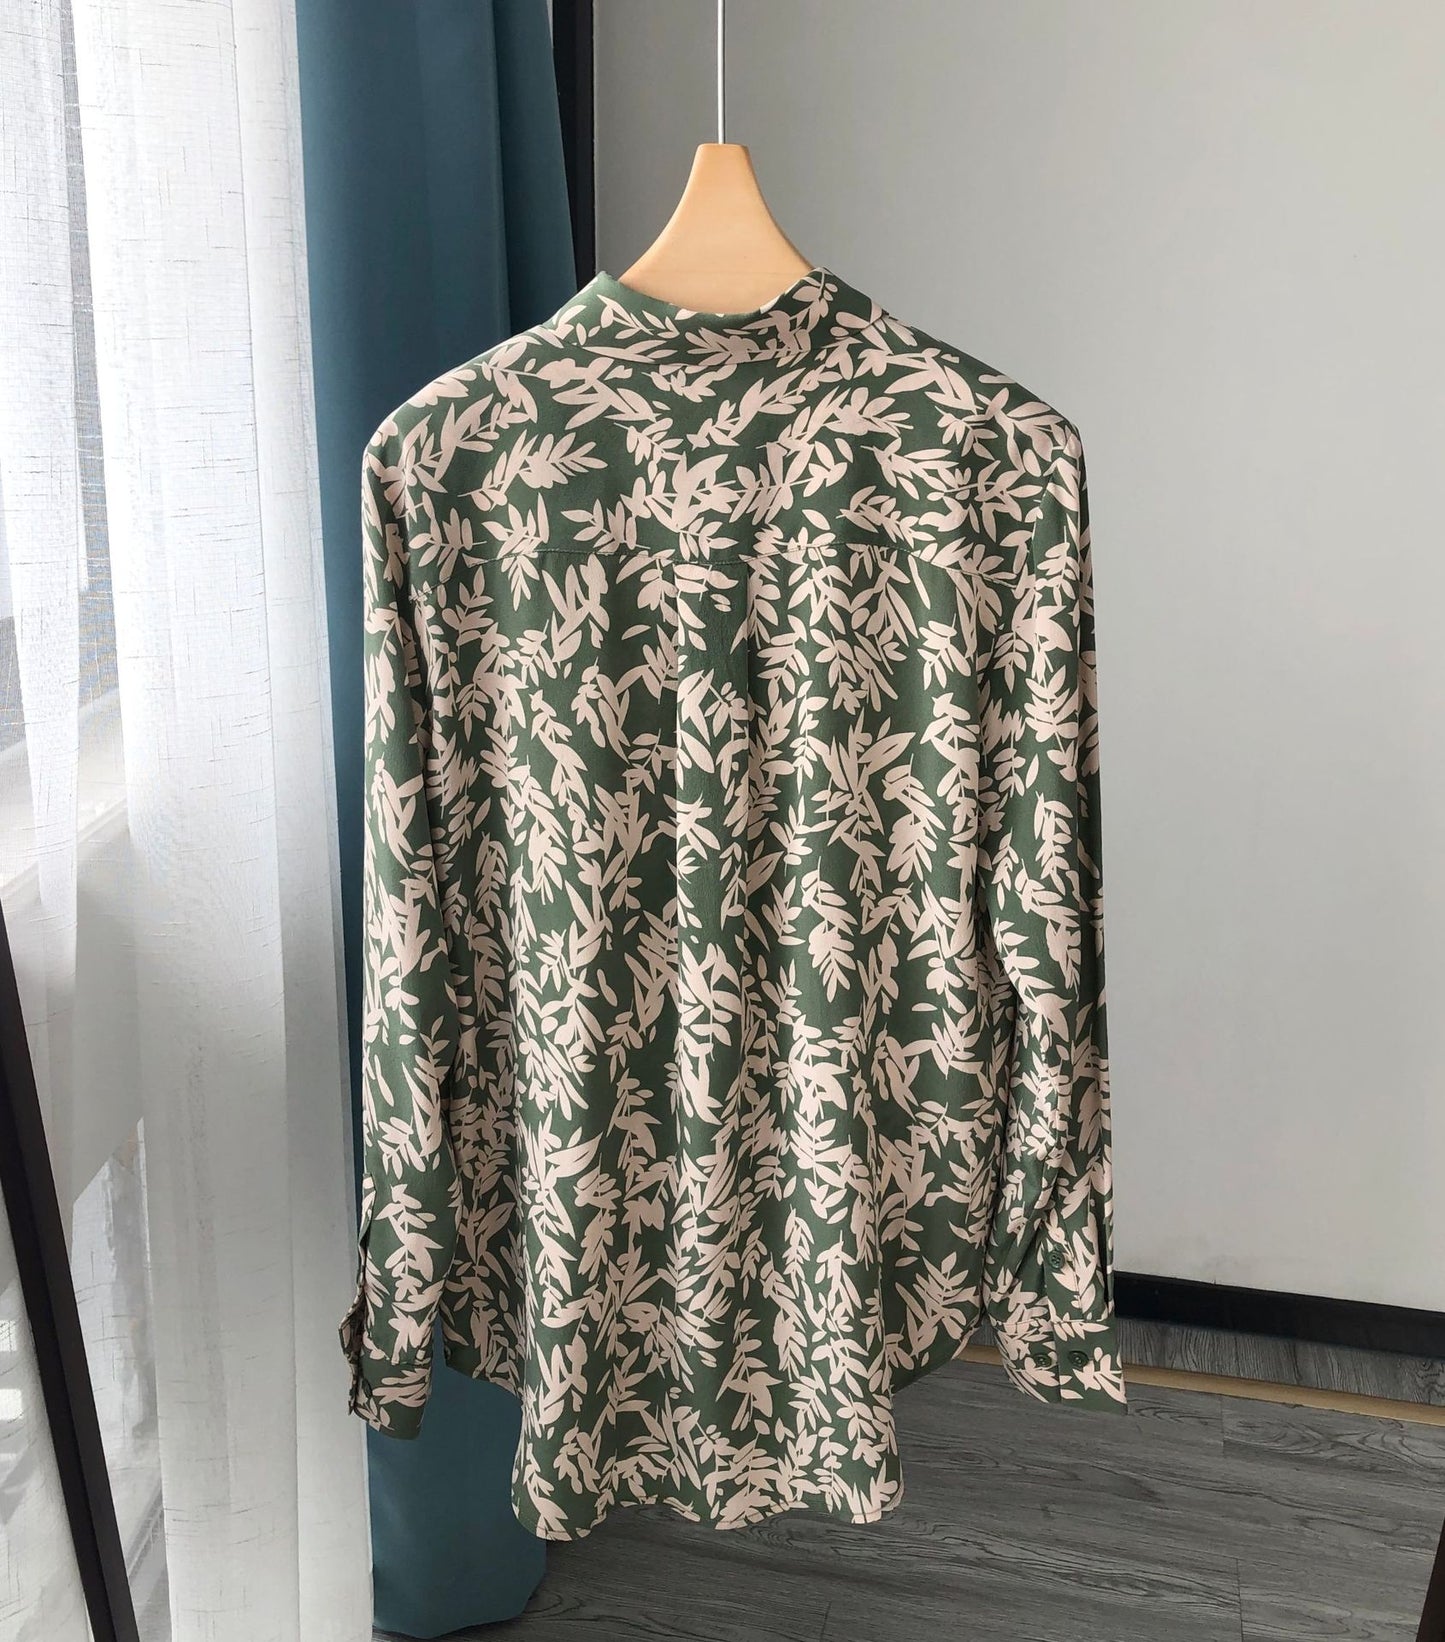 Sandwashed Silk Long-Sleeved Shirt with Fresh Bamboo Leaf Print in Southern French Style for a Leisurely and Elegant Look